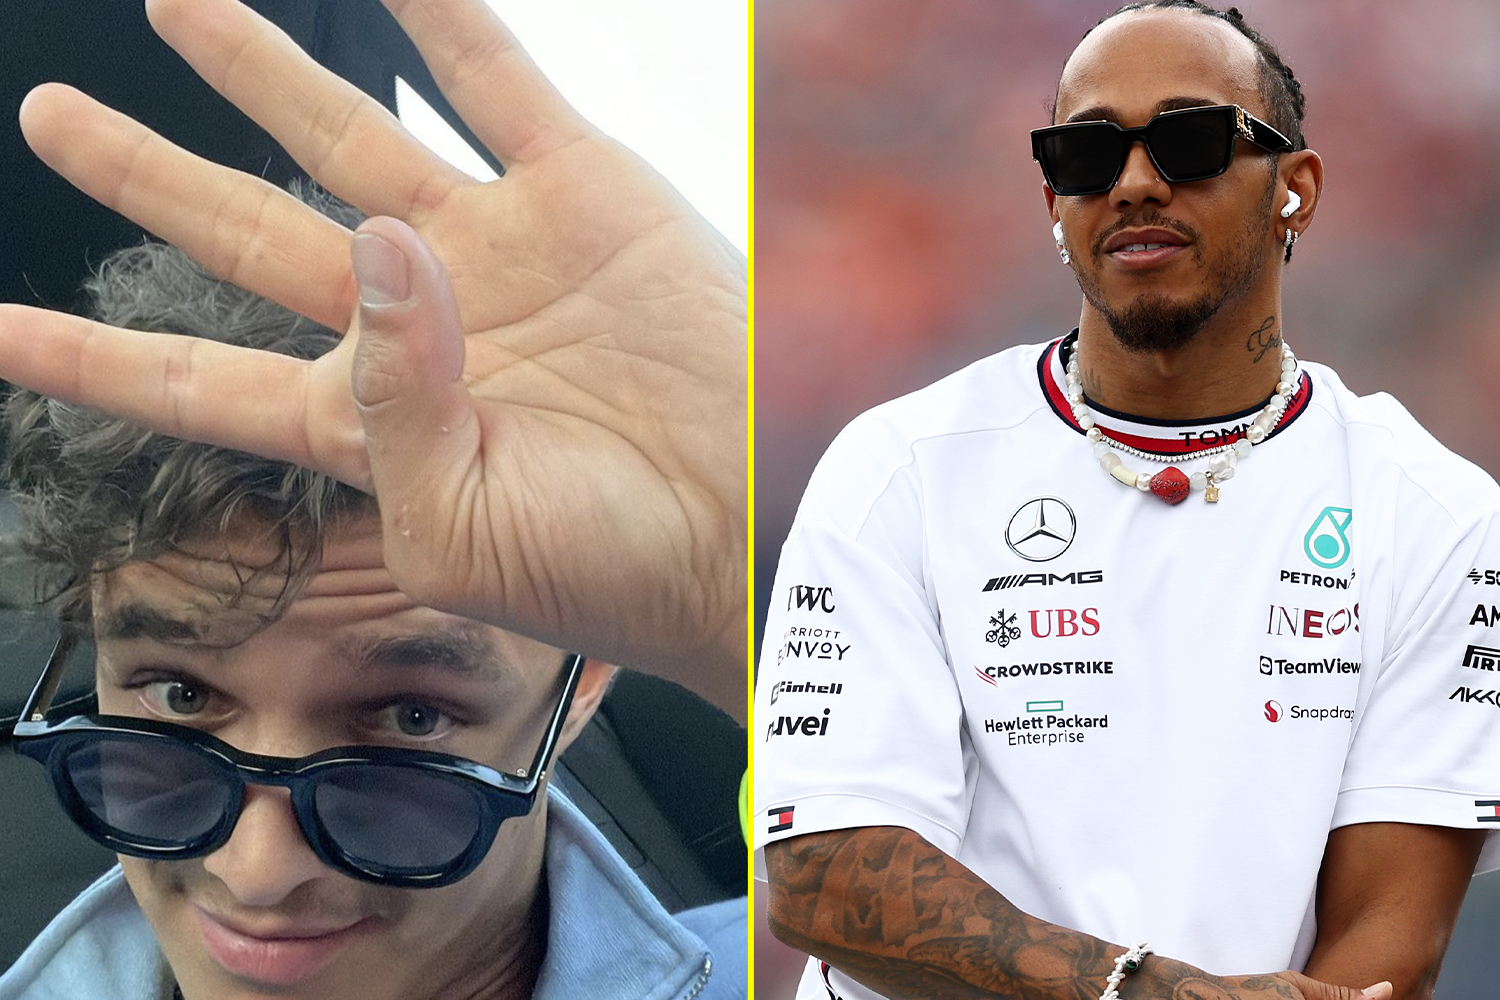 Lando Norris celebrates moving up place with four-fingered gesture as Lewis Hamilton is demoted at Austrian Grand Prix